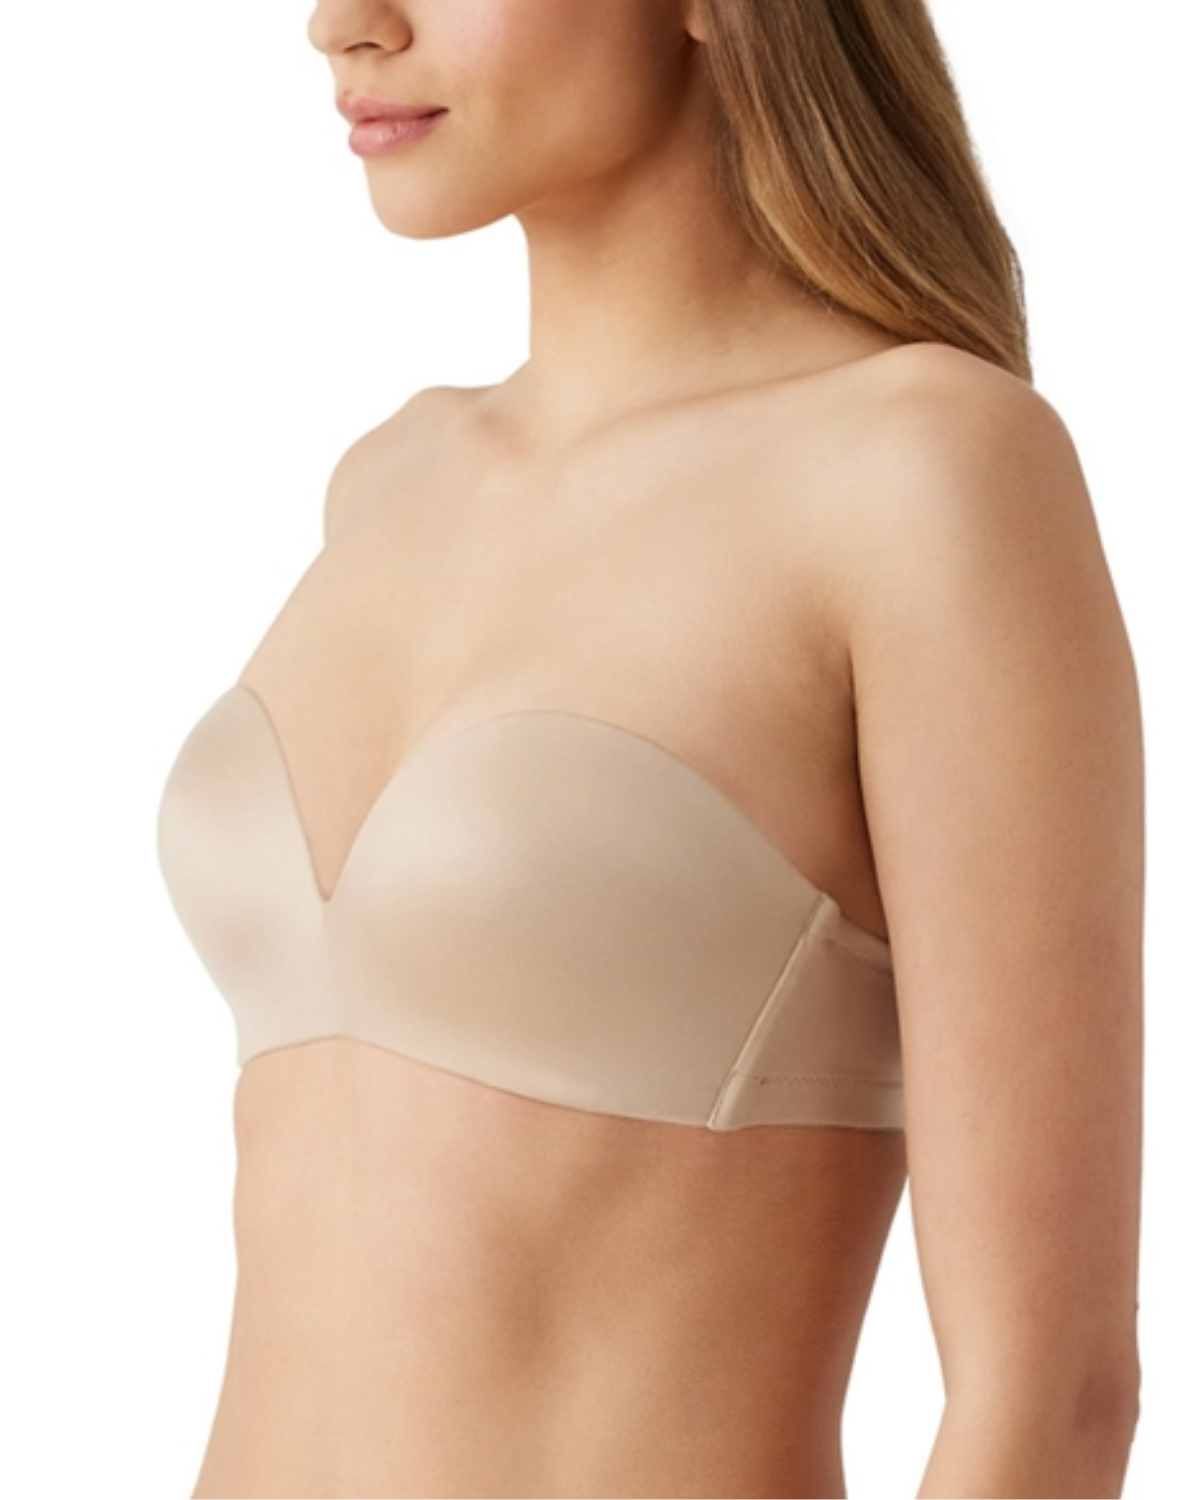 Model wearing a molded wire-free strapless bra in black with detachable straps to wear multiple ways in beige